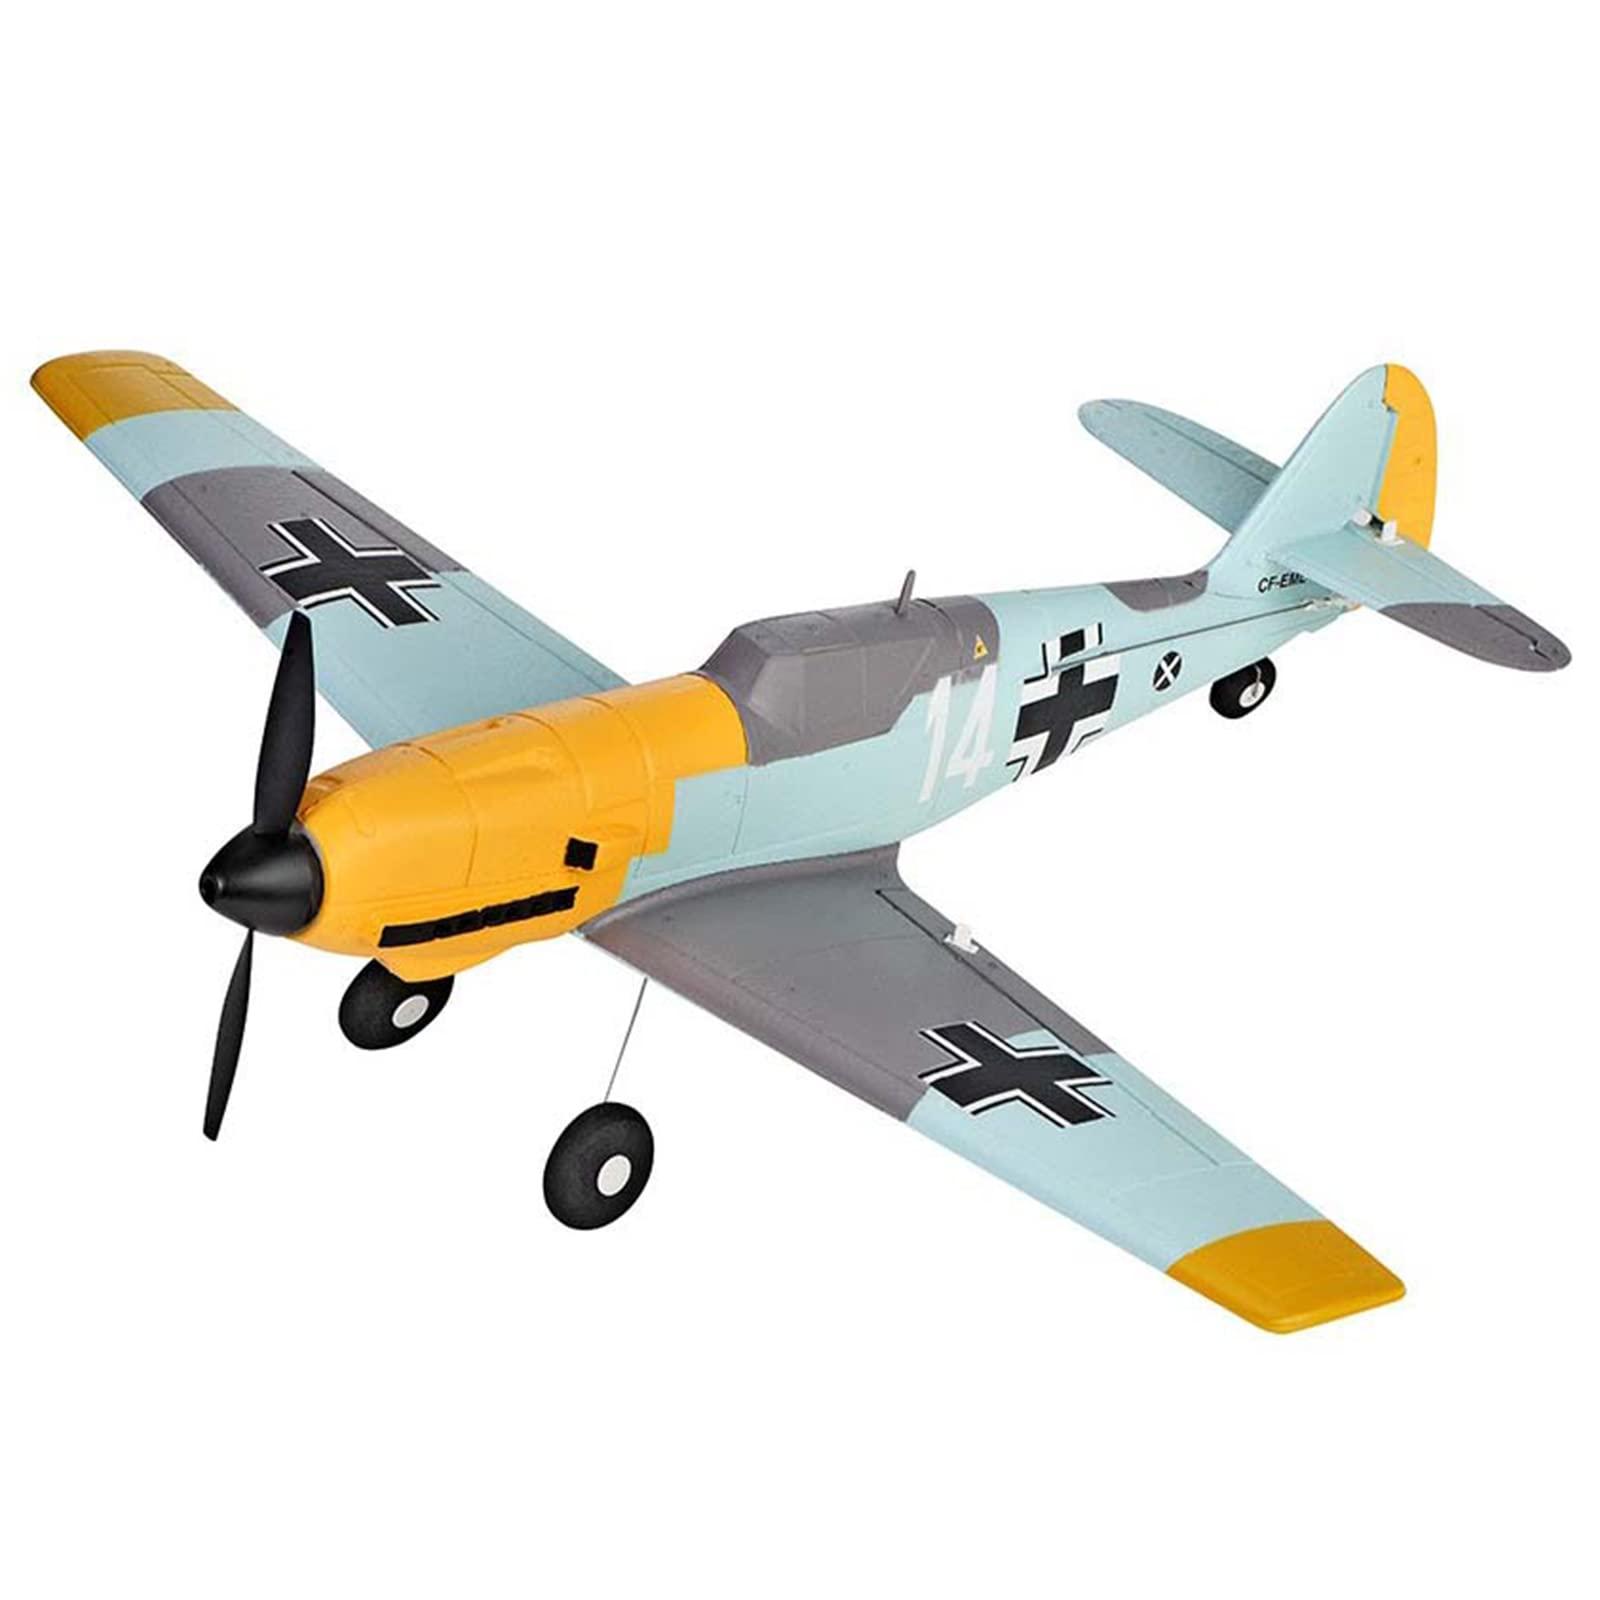 Buddy Box Rc Airplane: Buddy Box System: A Beginner's Guide to RC Airplane Flying